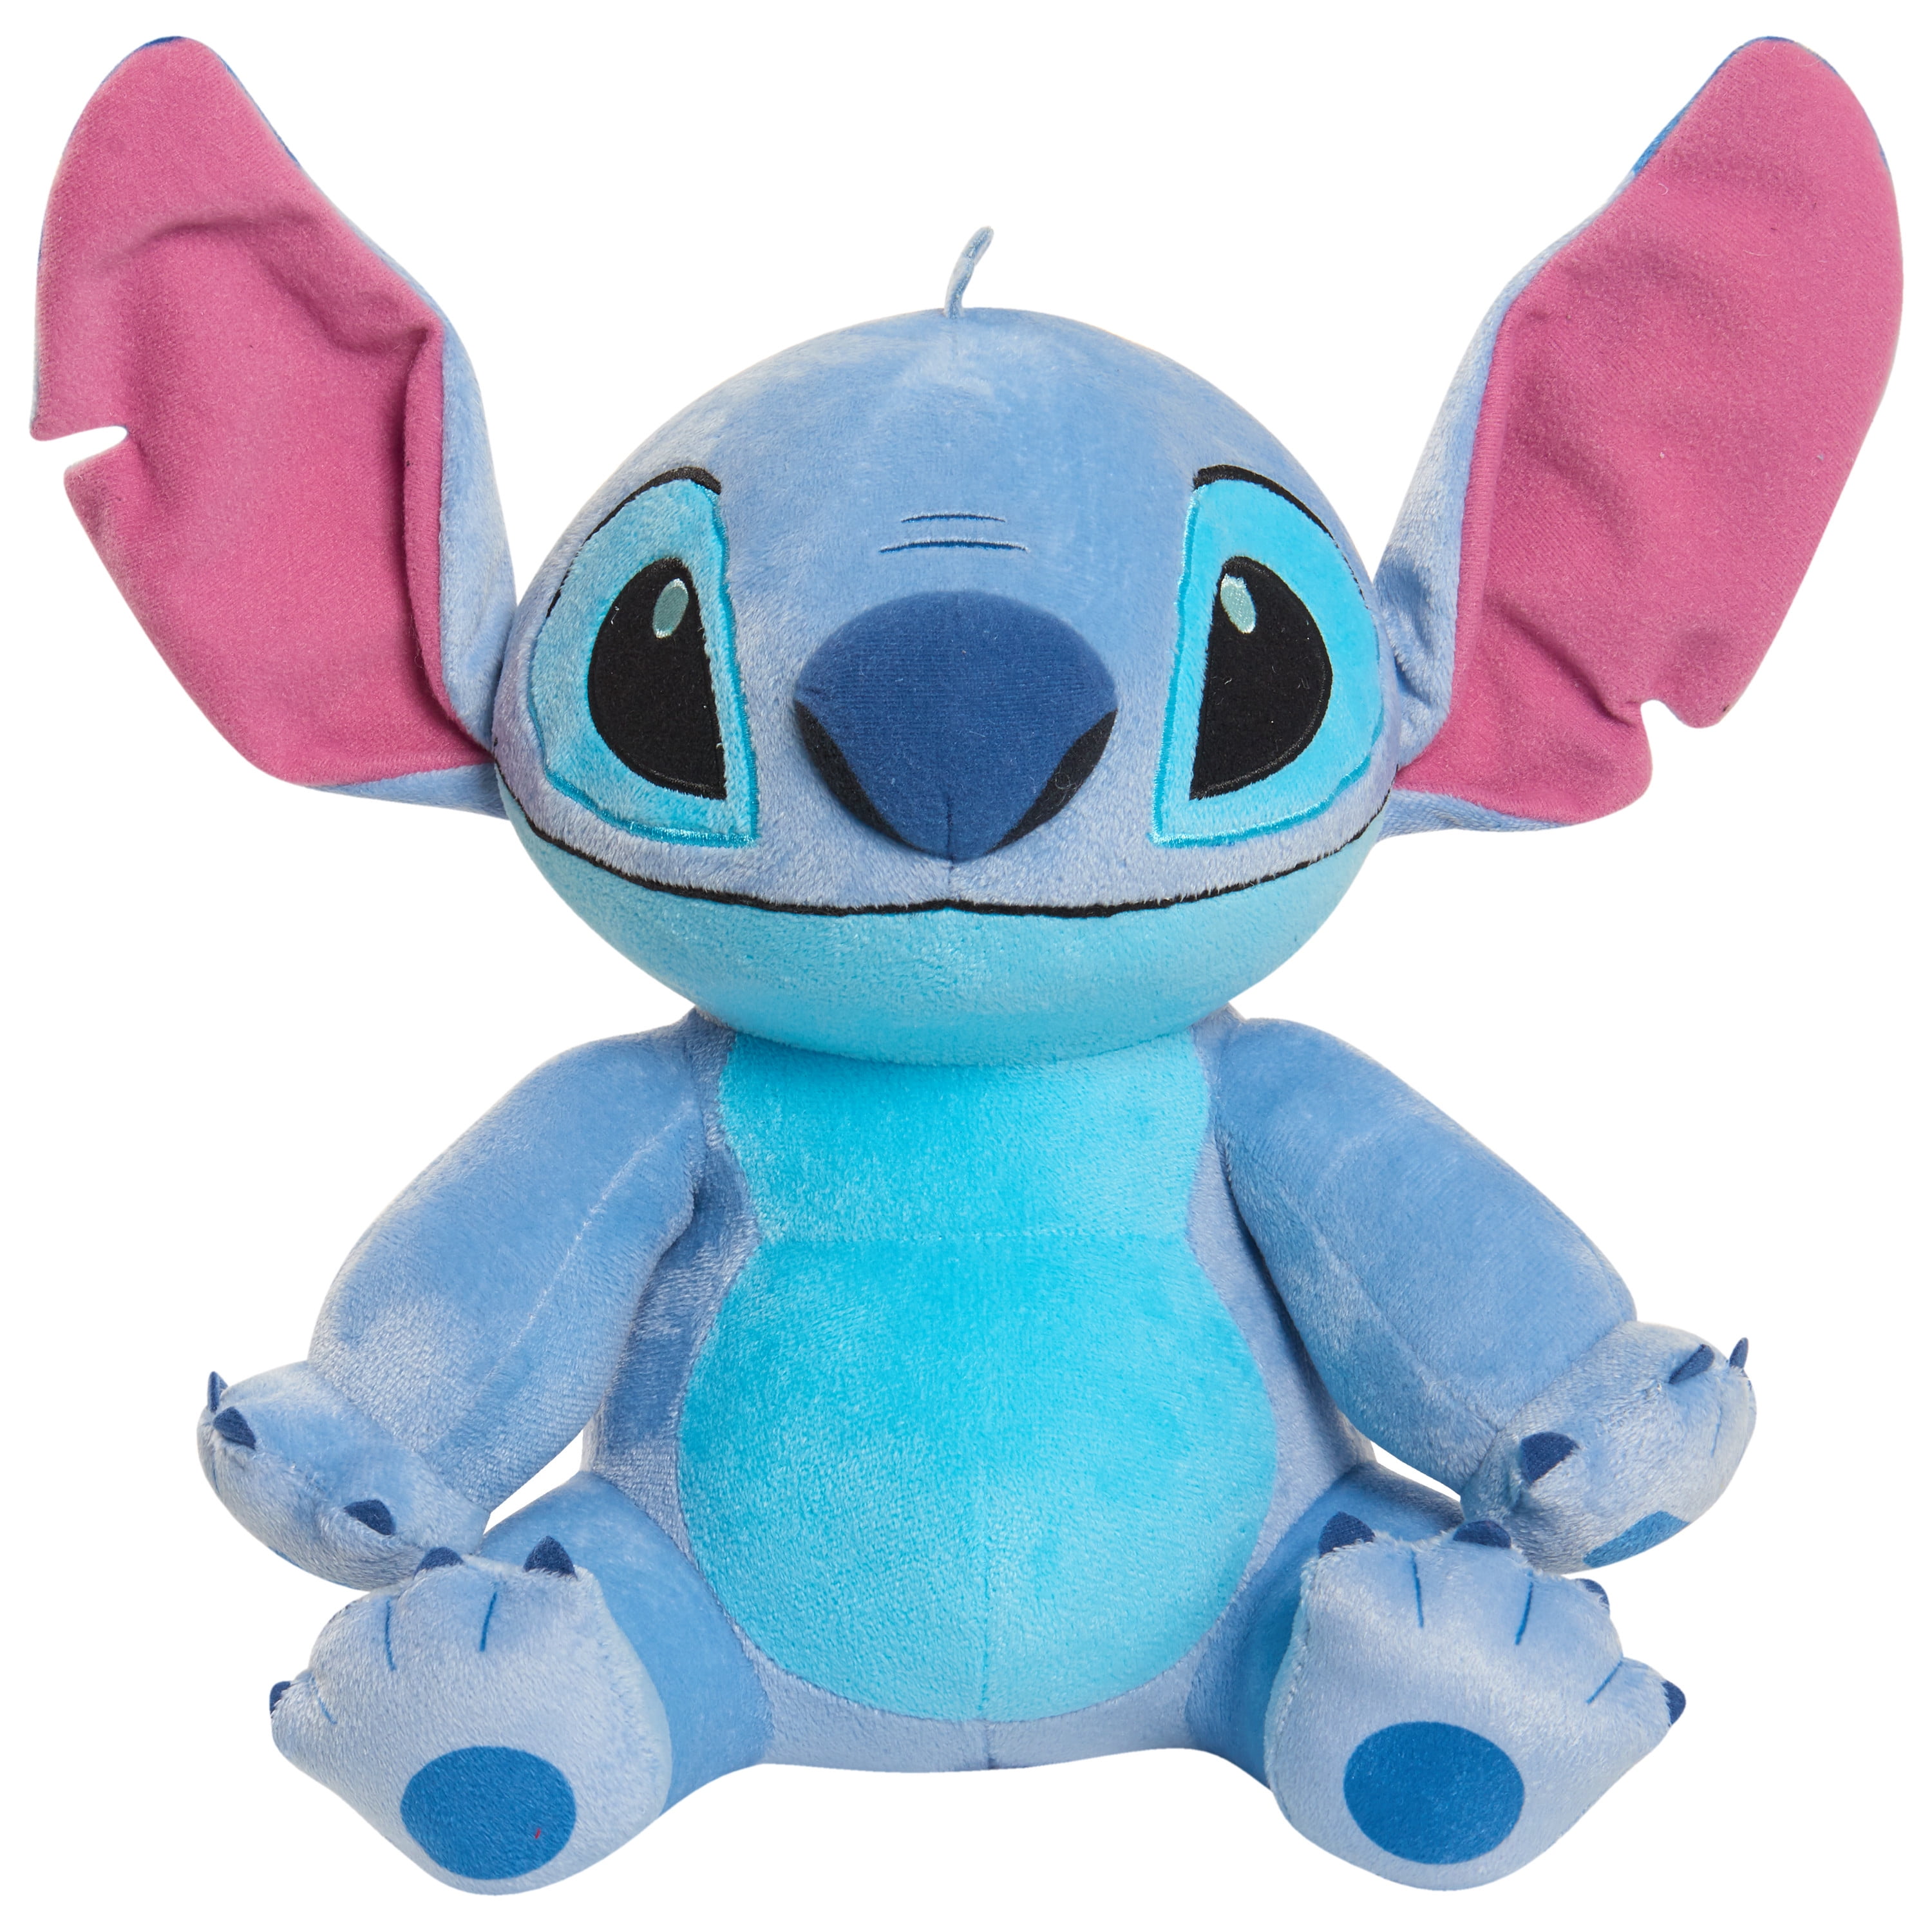 Disney Lilo & Stitch Jumbo Stitch Plush, Kids Toys for Ages 2 Up, Size: 8.0 inches; 8.0 inches; 14.5 Inches